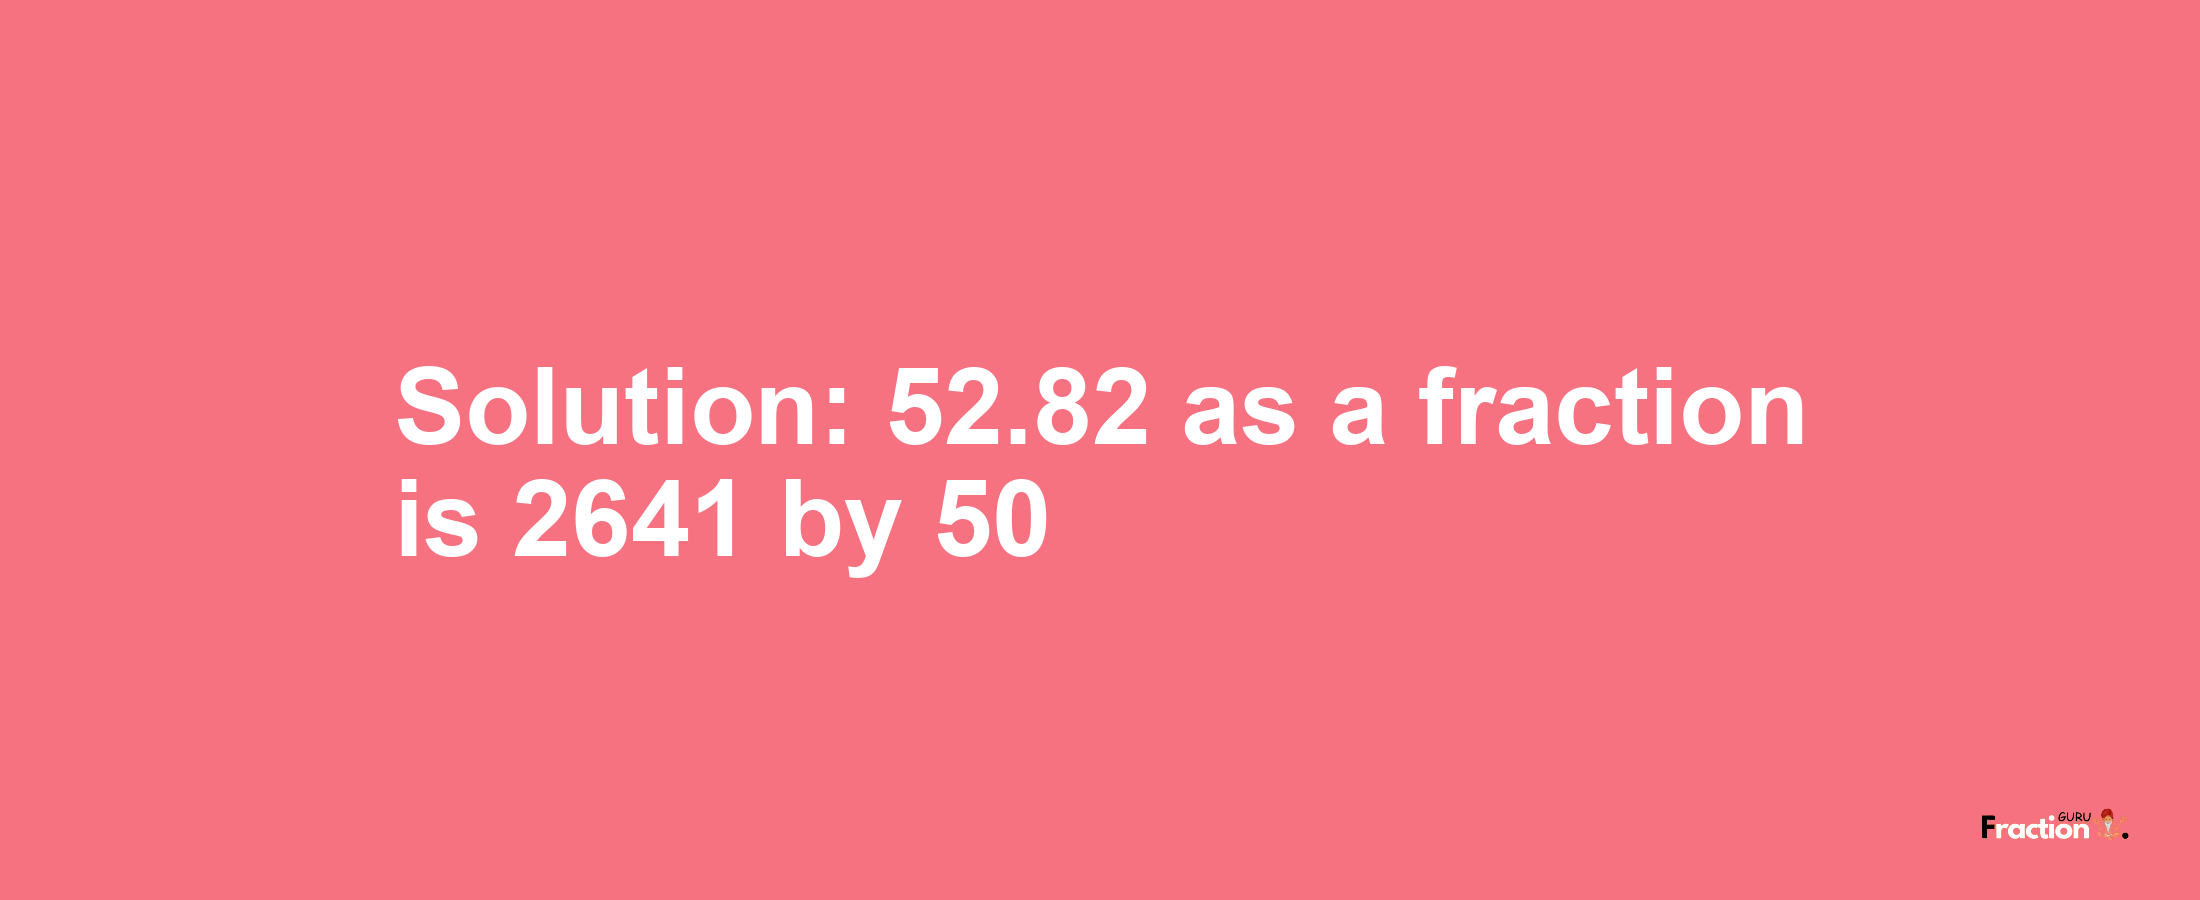 Solution:52.82 as a fraction is 2641/50